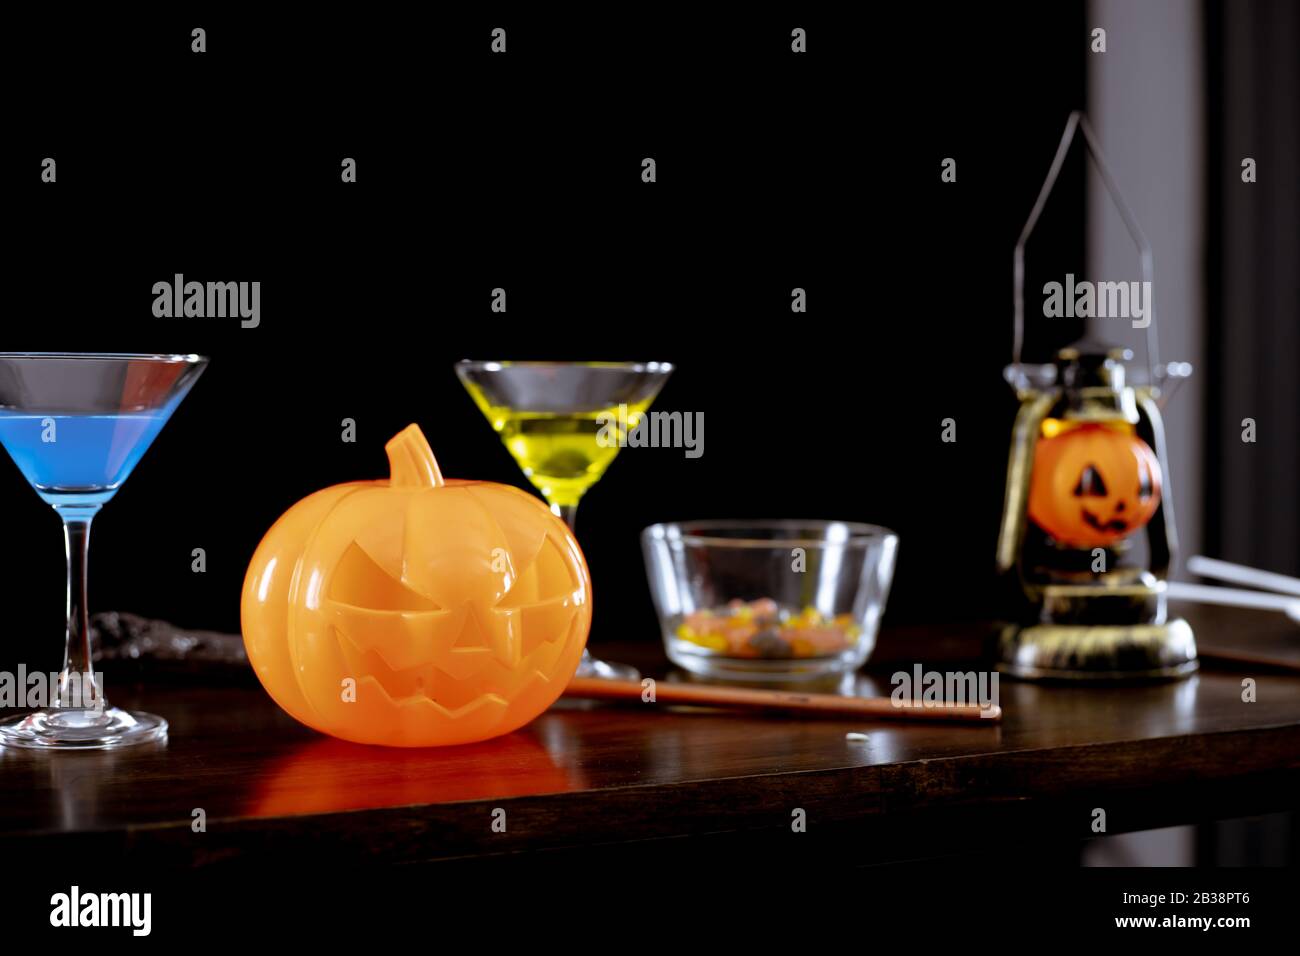 Ghost pumpkins, candies, and drinks on the table at the Halloween party in the night on dark background. Stock Photo